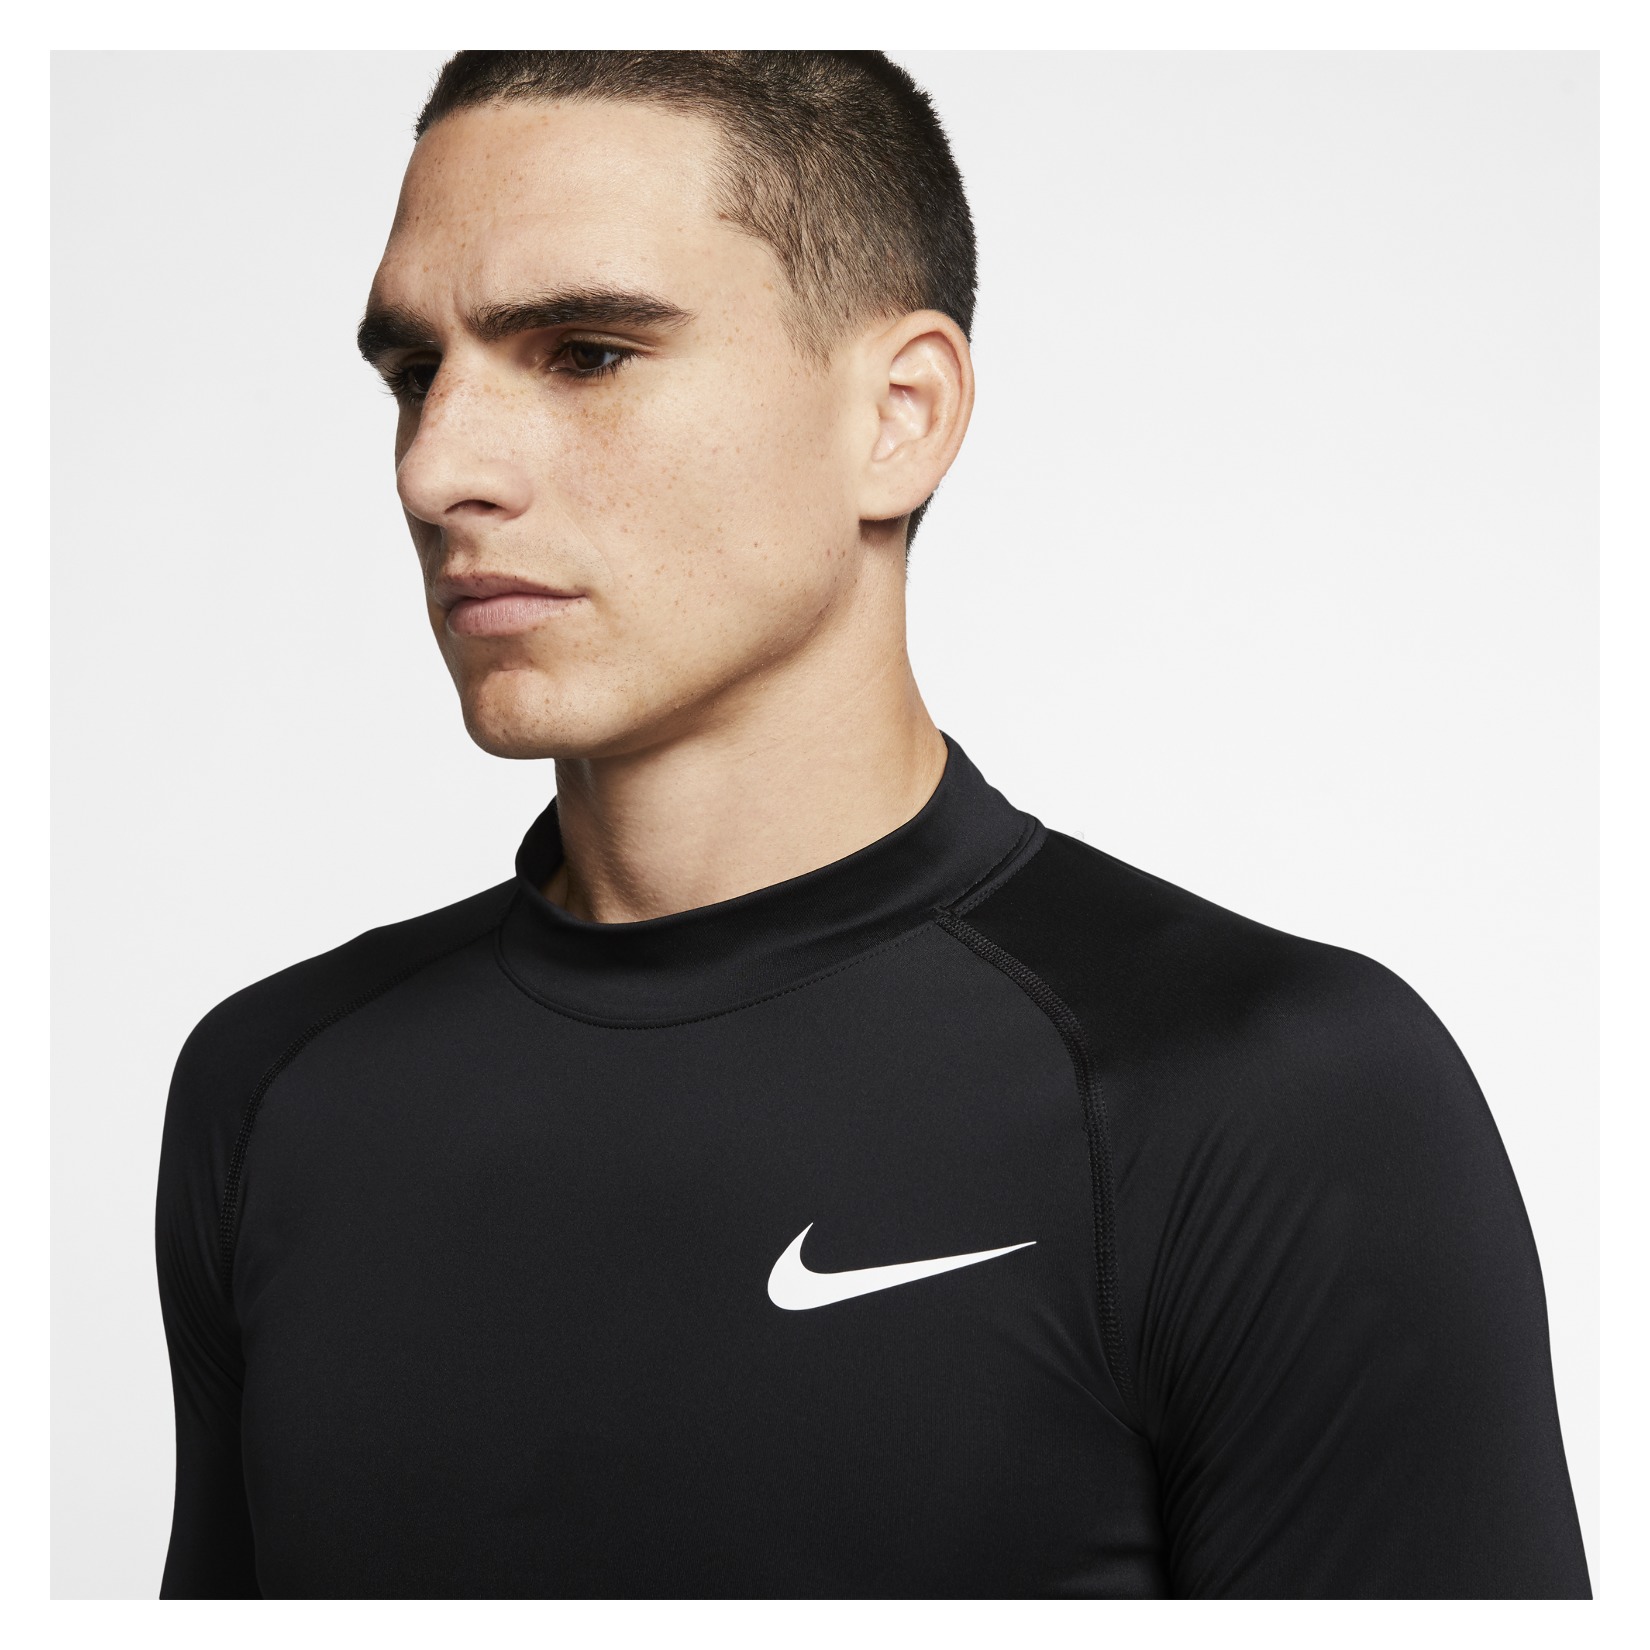 Nike Pro Mock Neck Tight Fit Long Sleeve Top